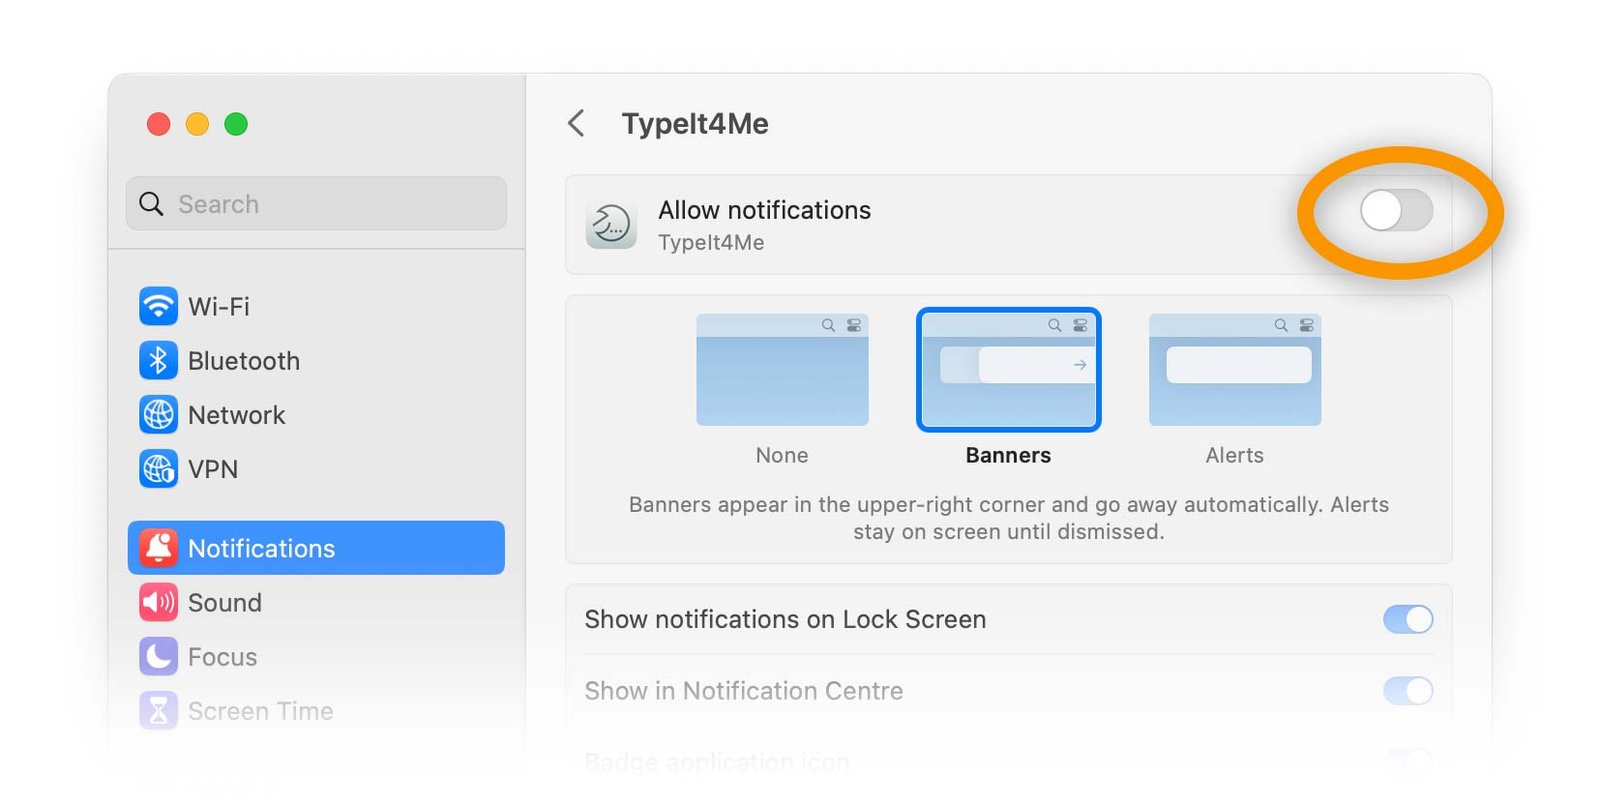 A screenshot of System Settings in macOS Ventura, showing the notification settings for TypeIt4Me, with "Allow notifications" turned off